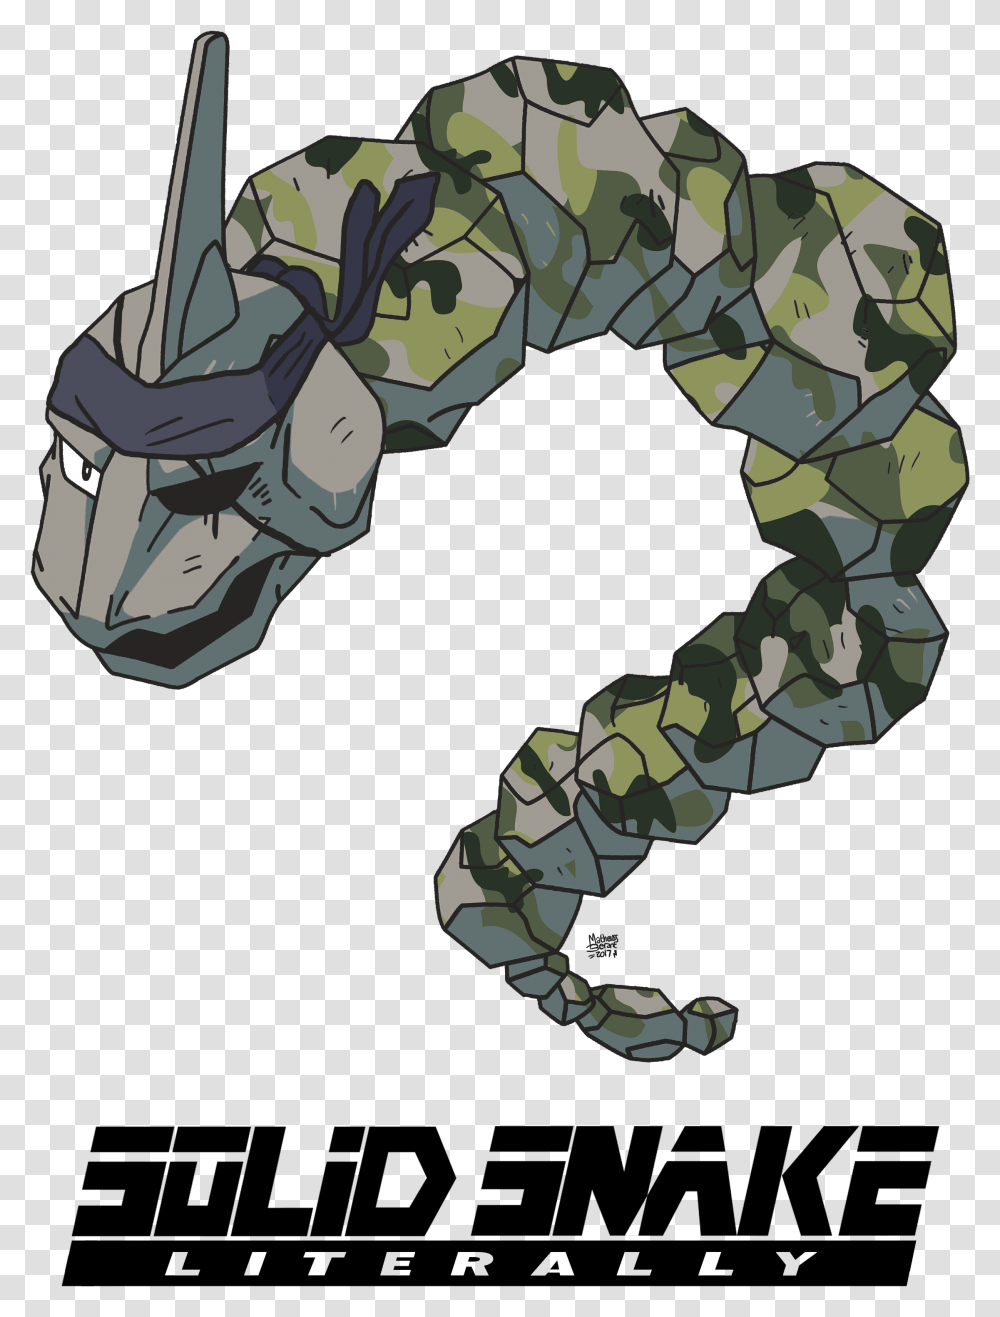 Onix Pokemon Solid Snake As A Snake, Art, Outdoors, Nature, Statue Transparent Png